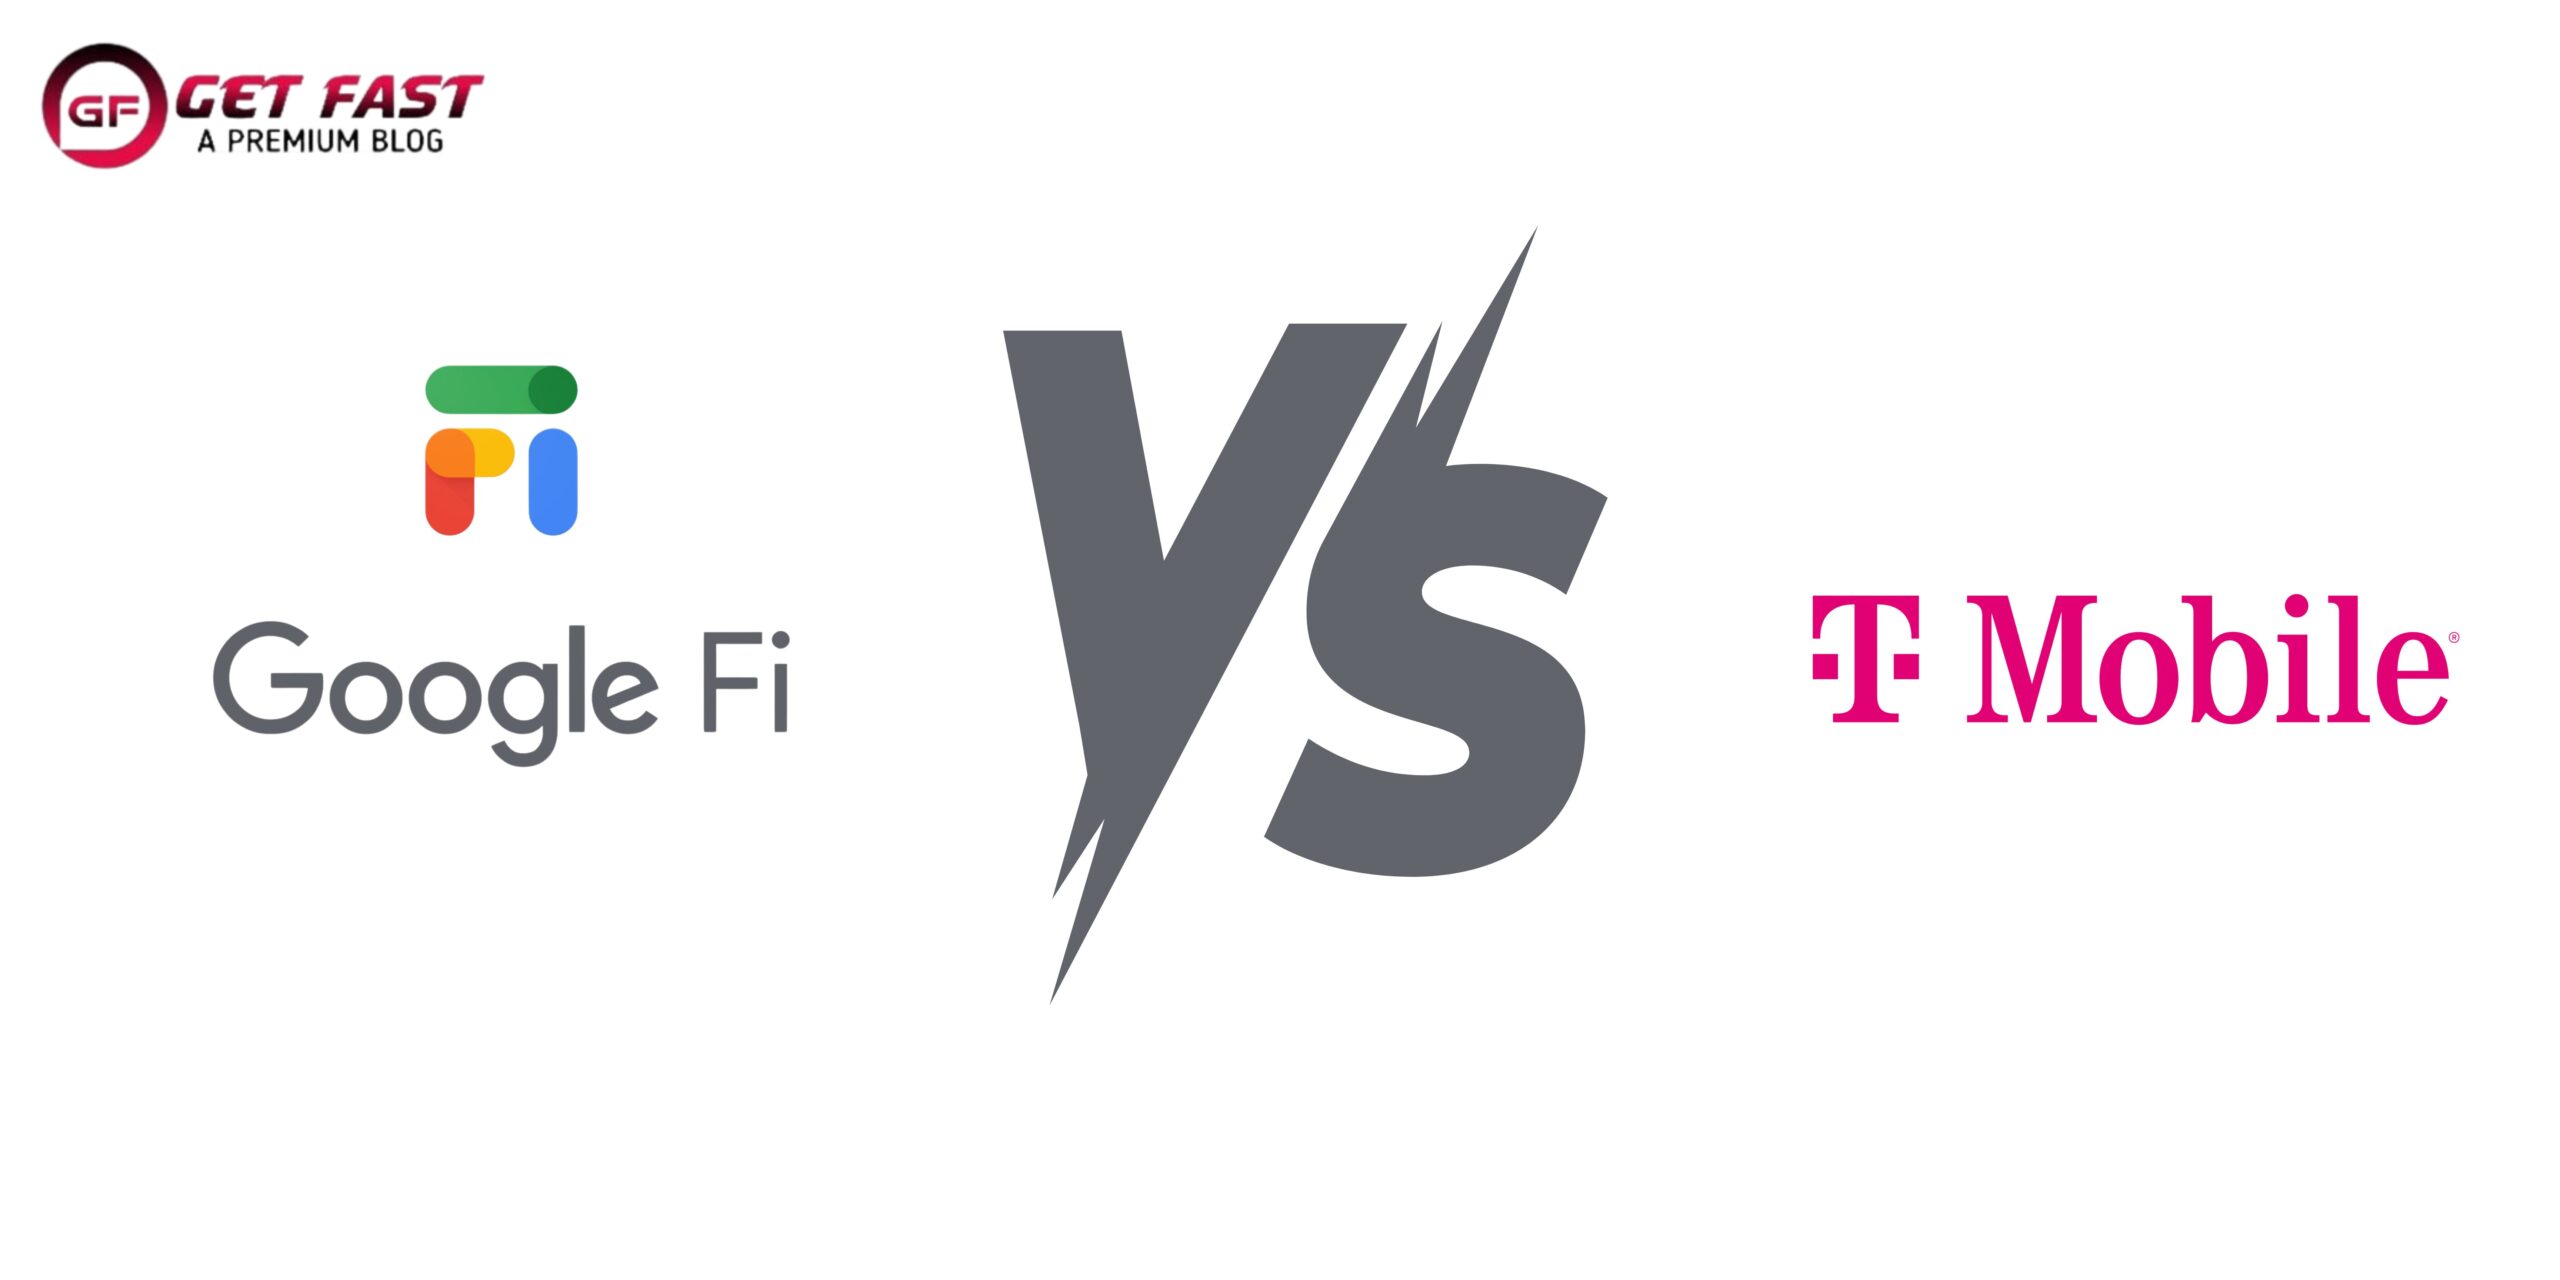 Google Fi and T Mobile